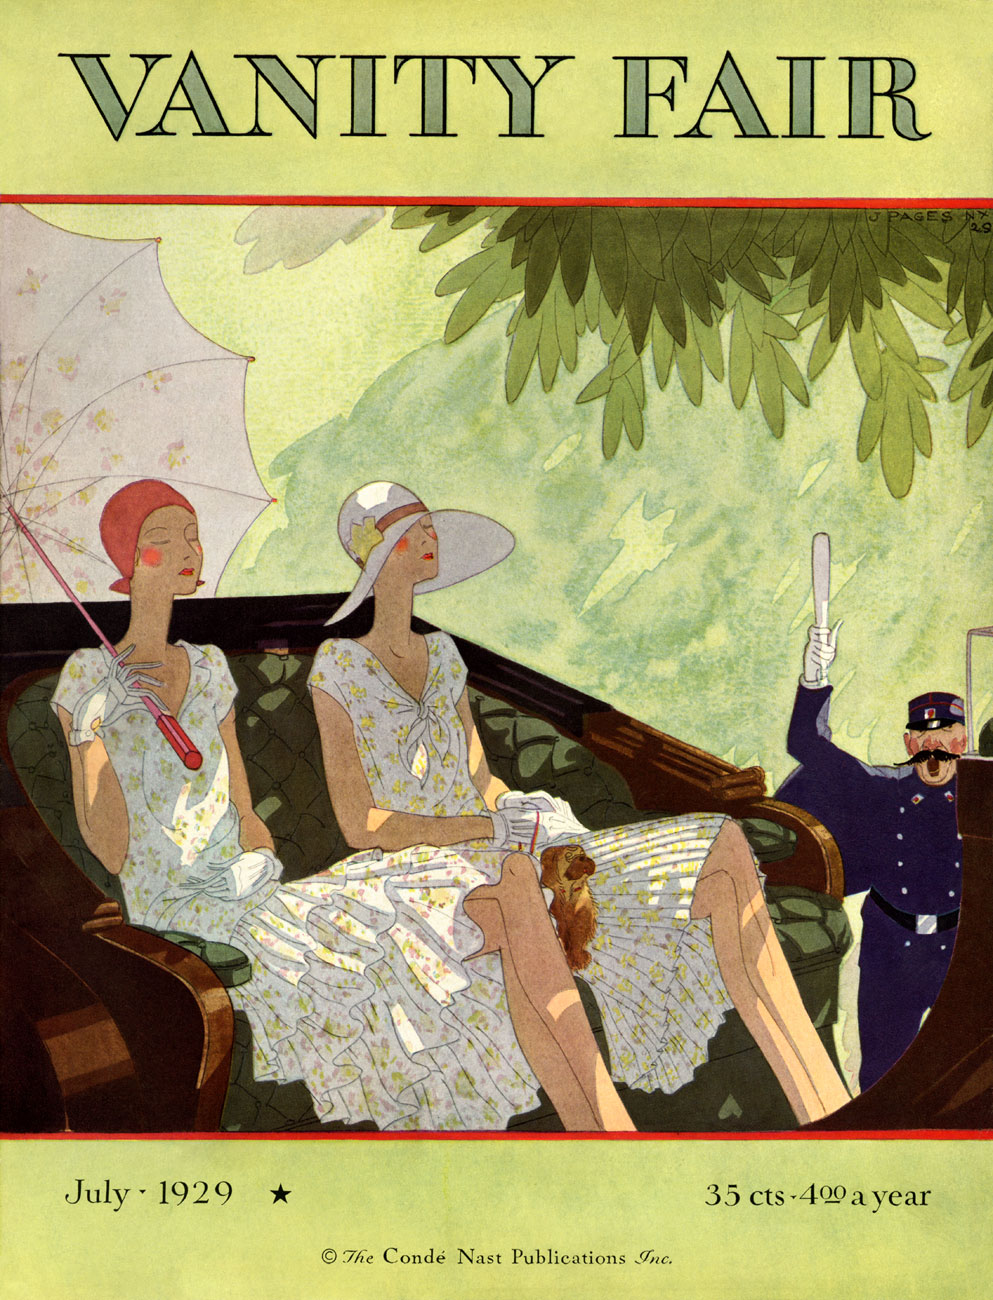 The Paris Review - Chartreuse, the Color of Elixirs, Flappers, and  Alternate Realities - The Paris Review